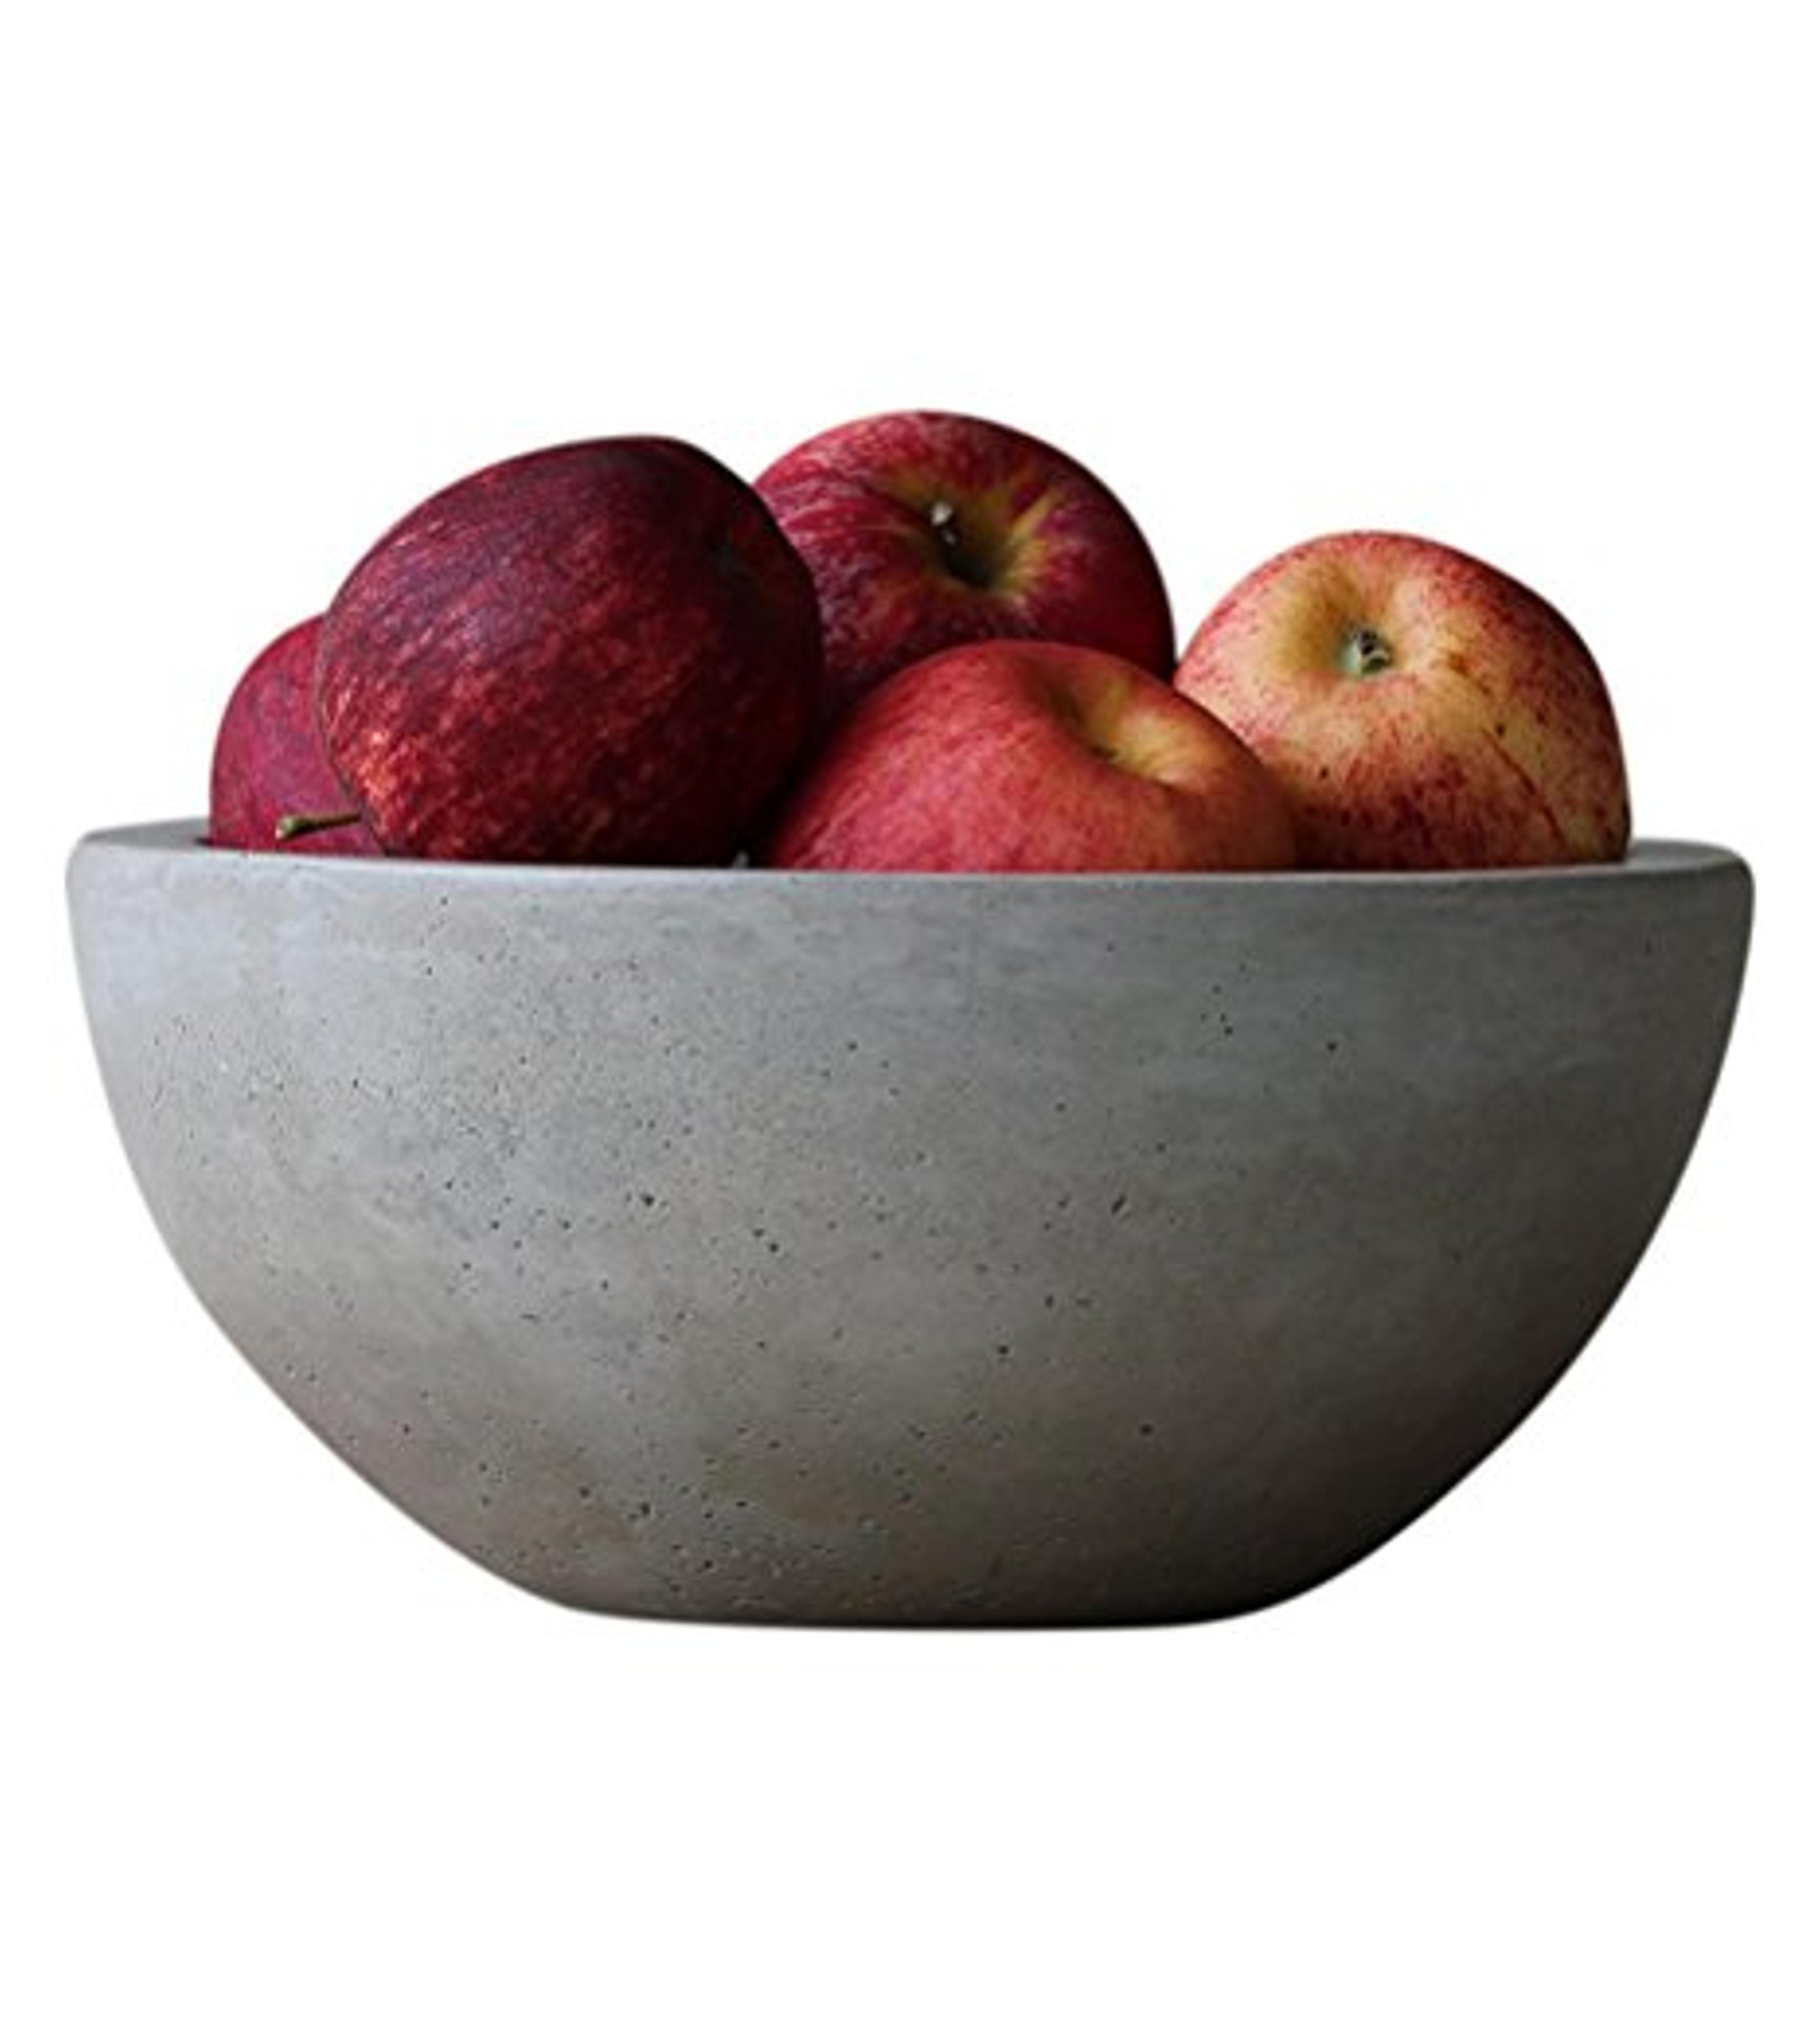 Scoutmob Home Concrete Fruit Bowl One Size